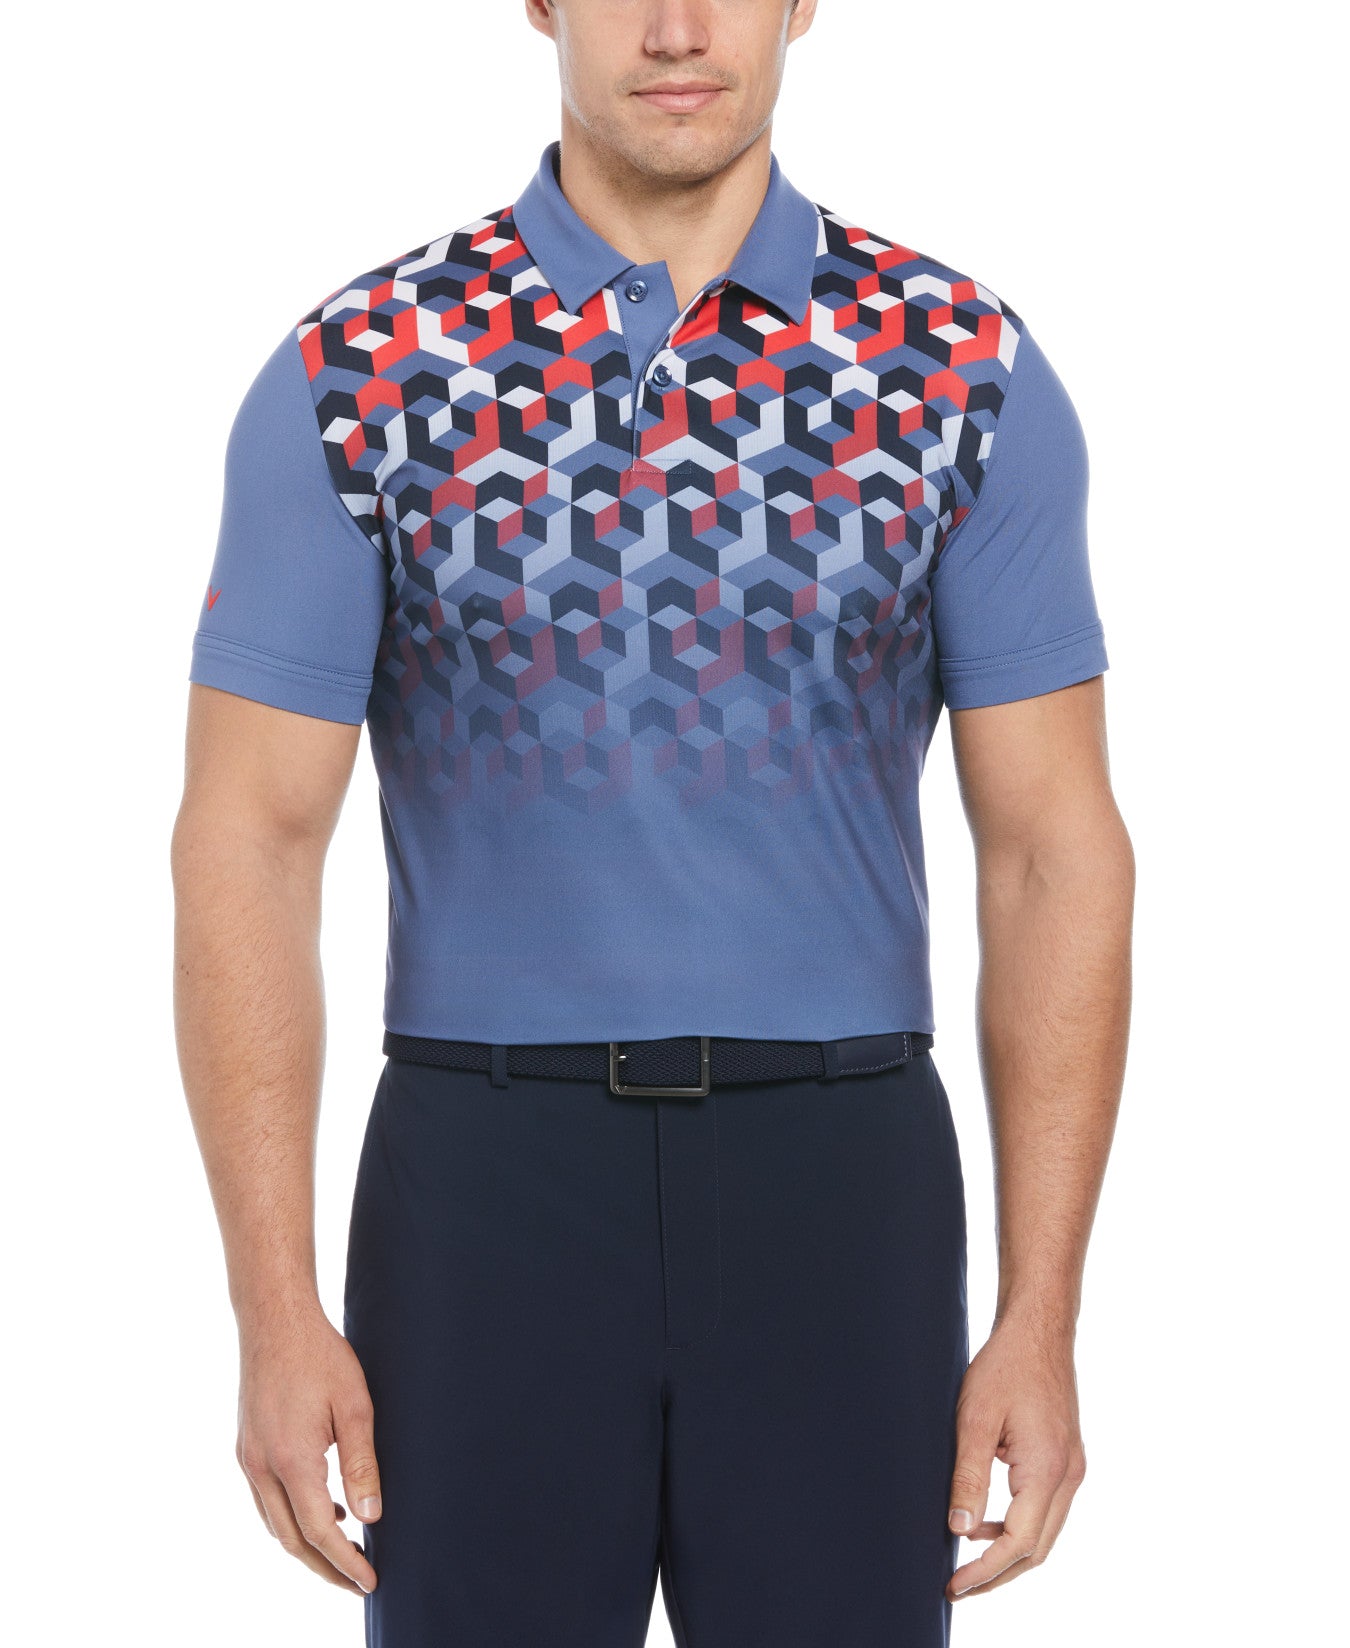 View Short Sleeve Ombre 3D Chev Geo Print Polo Shirt In Bijou Blue information